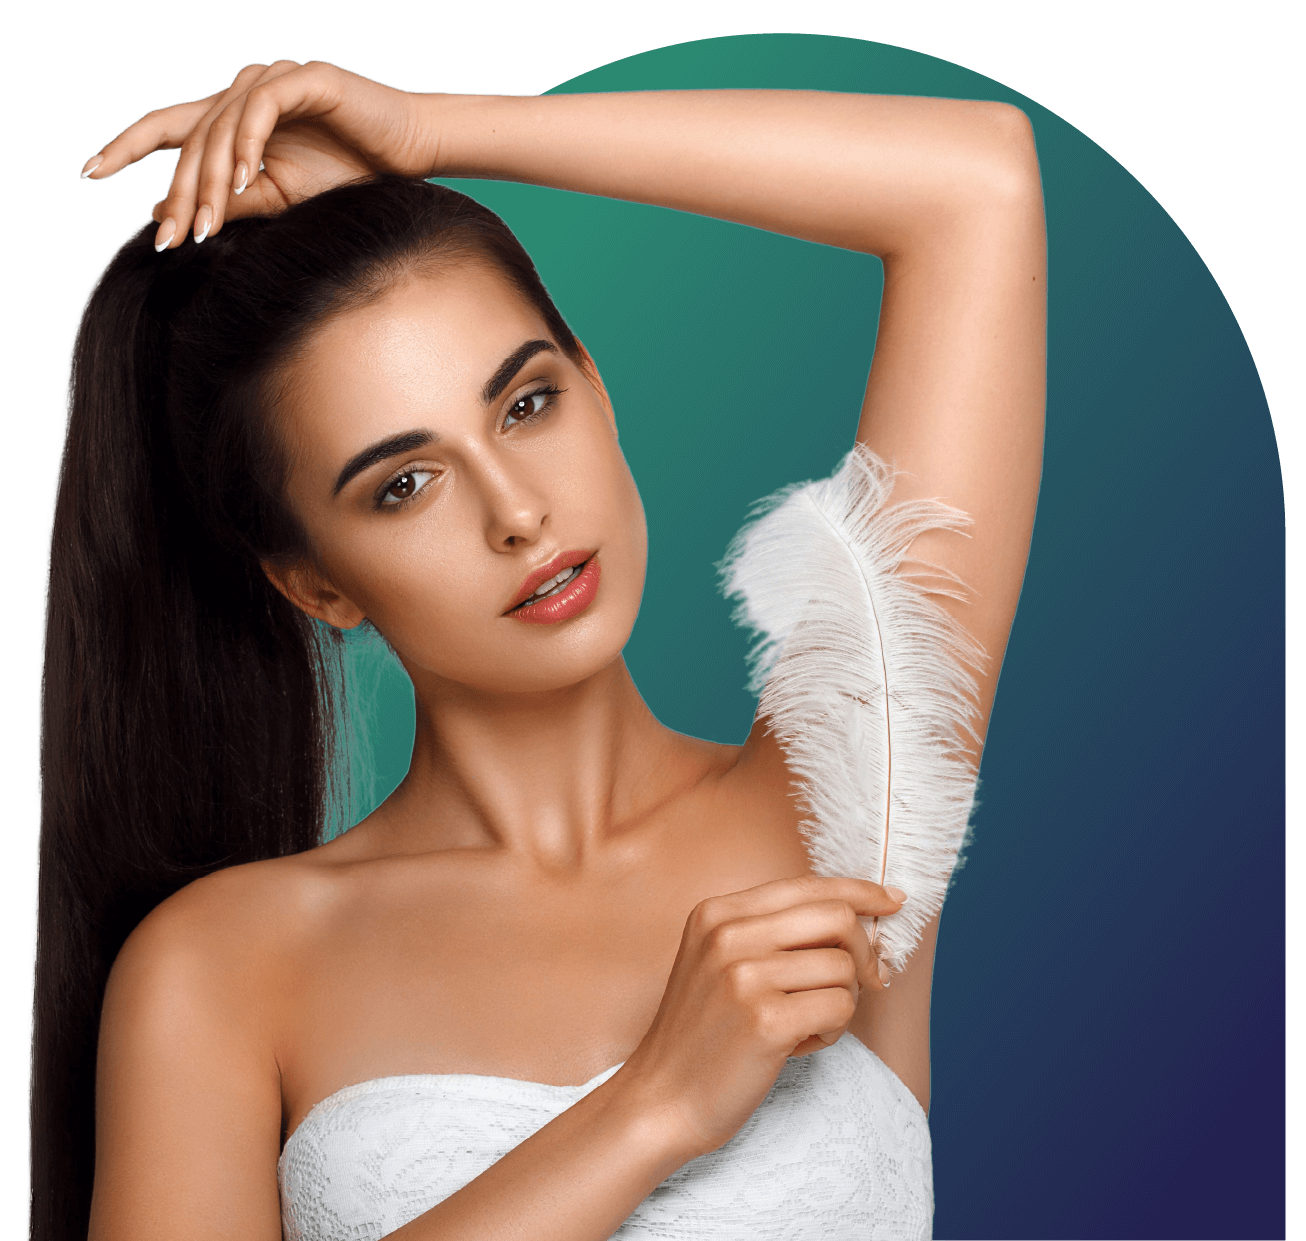 Hair removal services for women